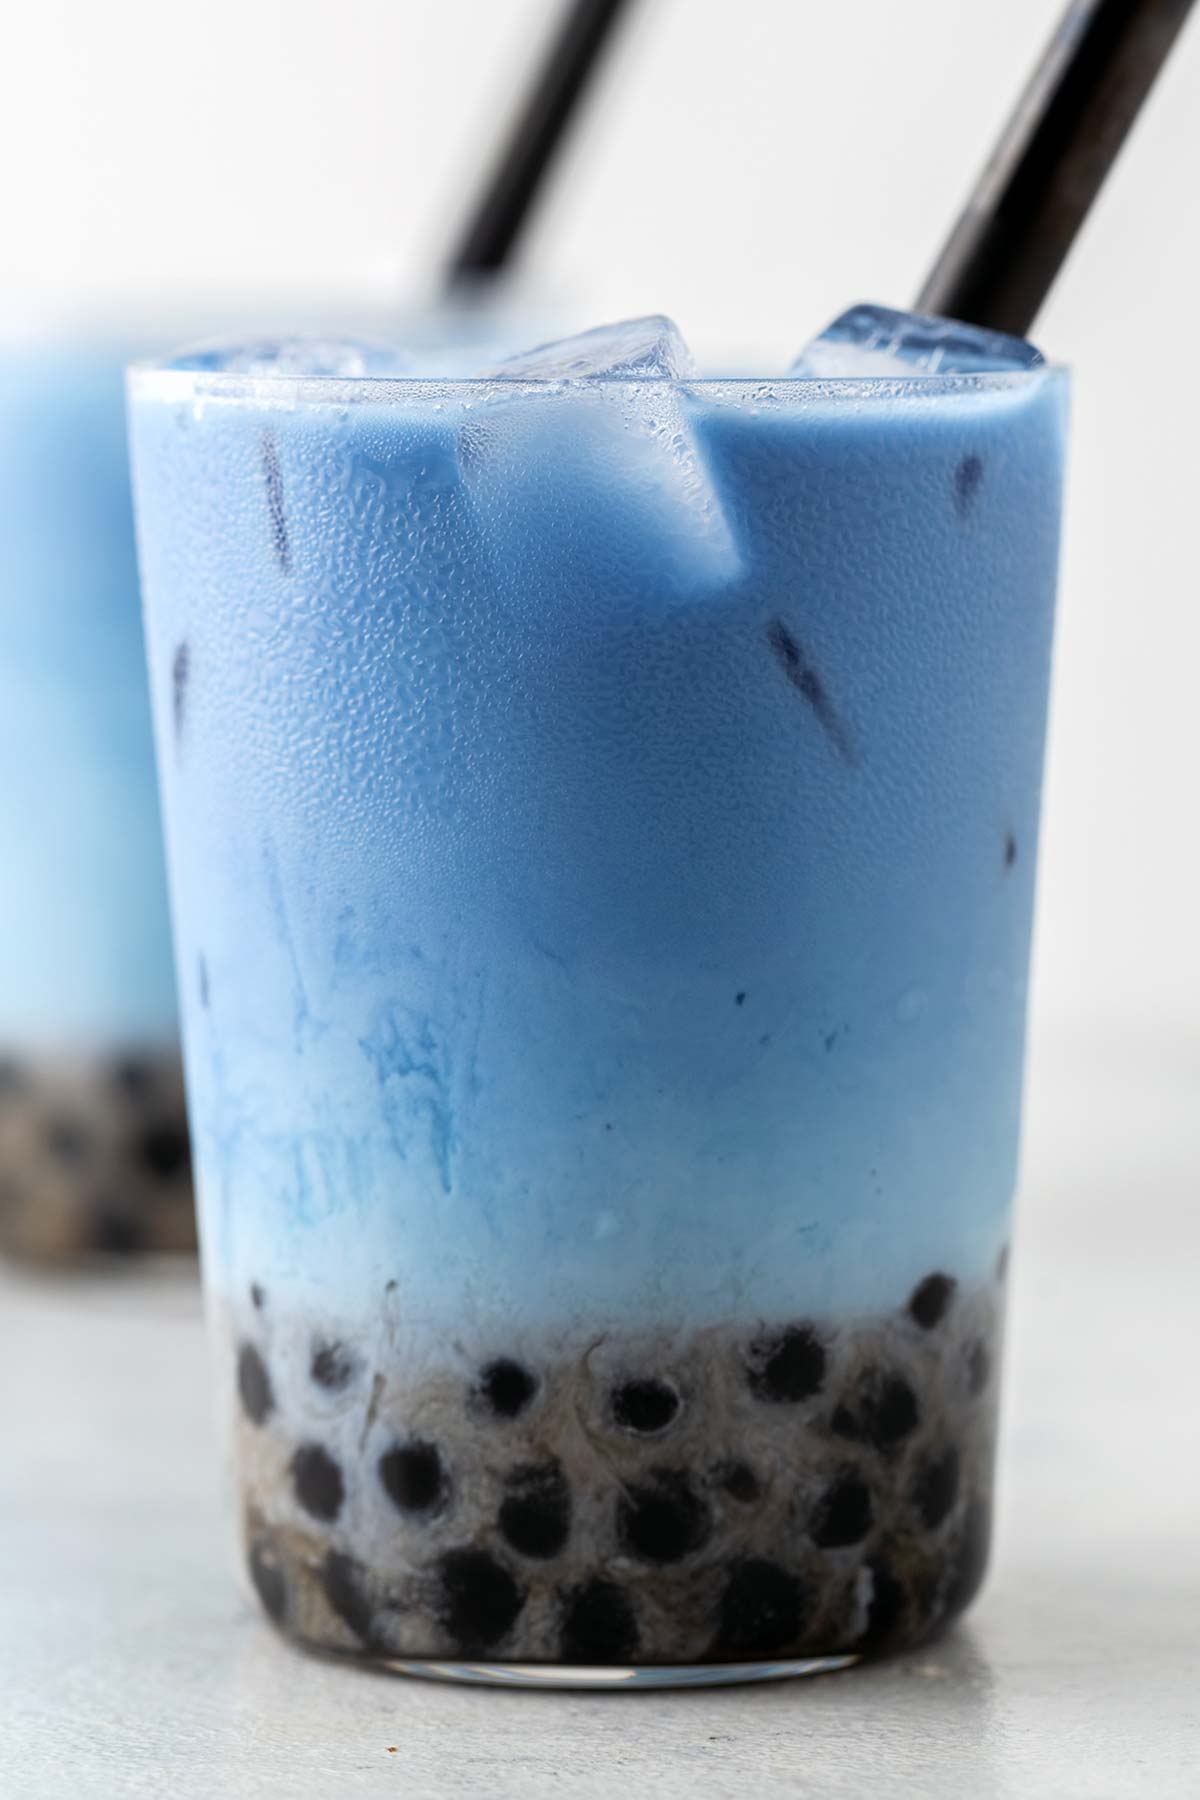 A Butterfly Pea Flower Bubble Tea (Butterfly Pea Flower Milk Tea with Boba) in a clear glass with a wide straw and boba at the bottom.